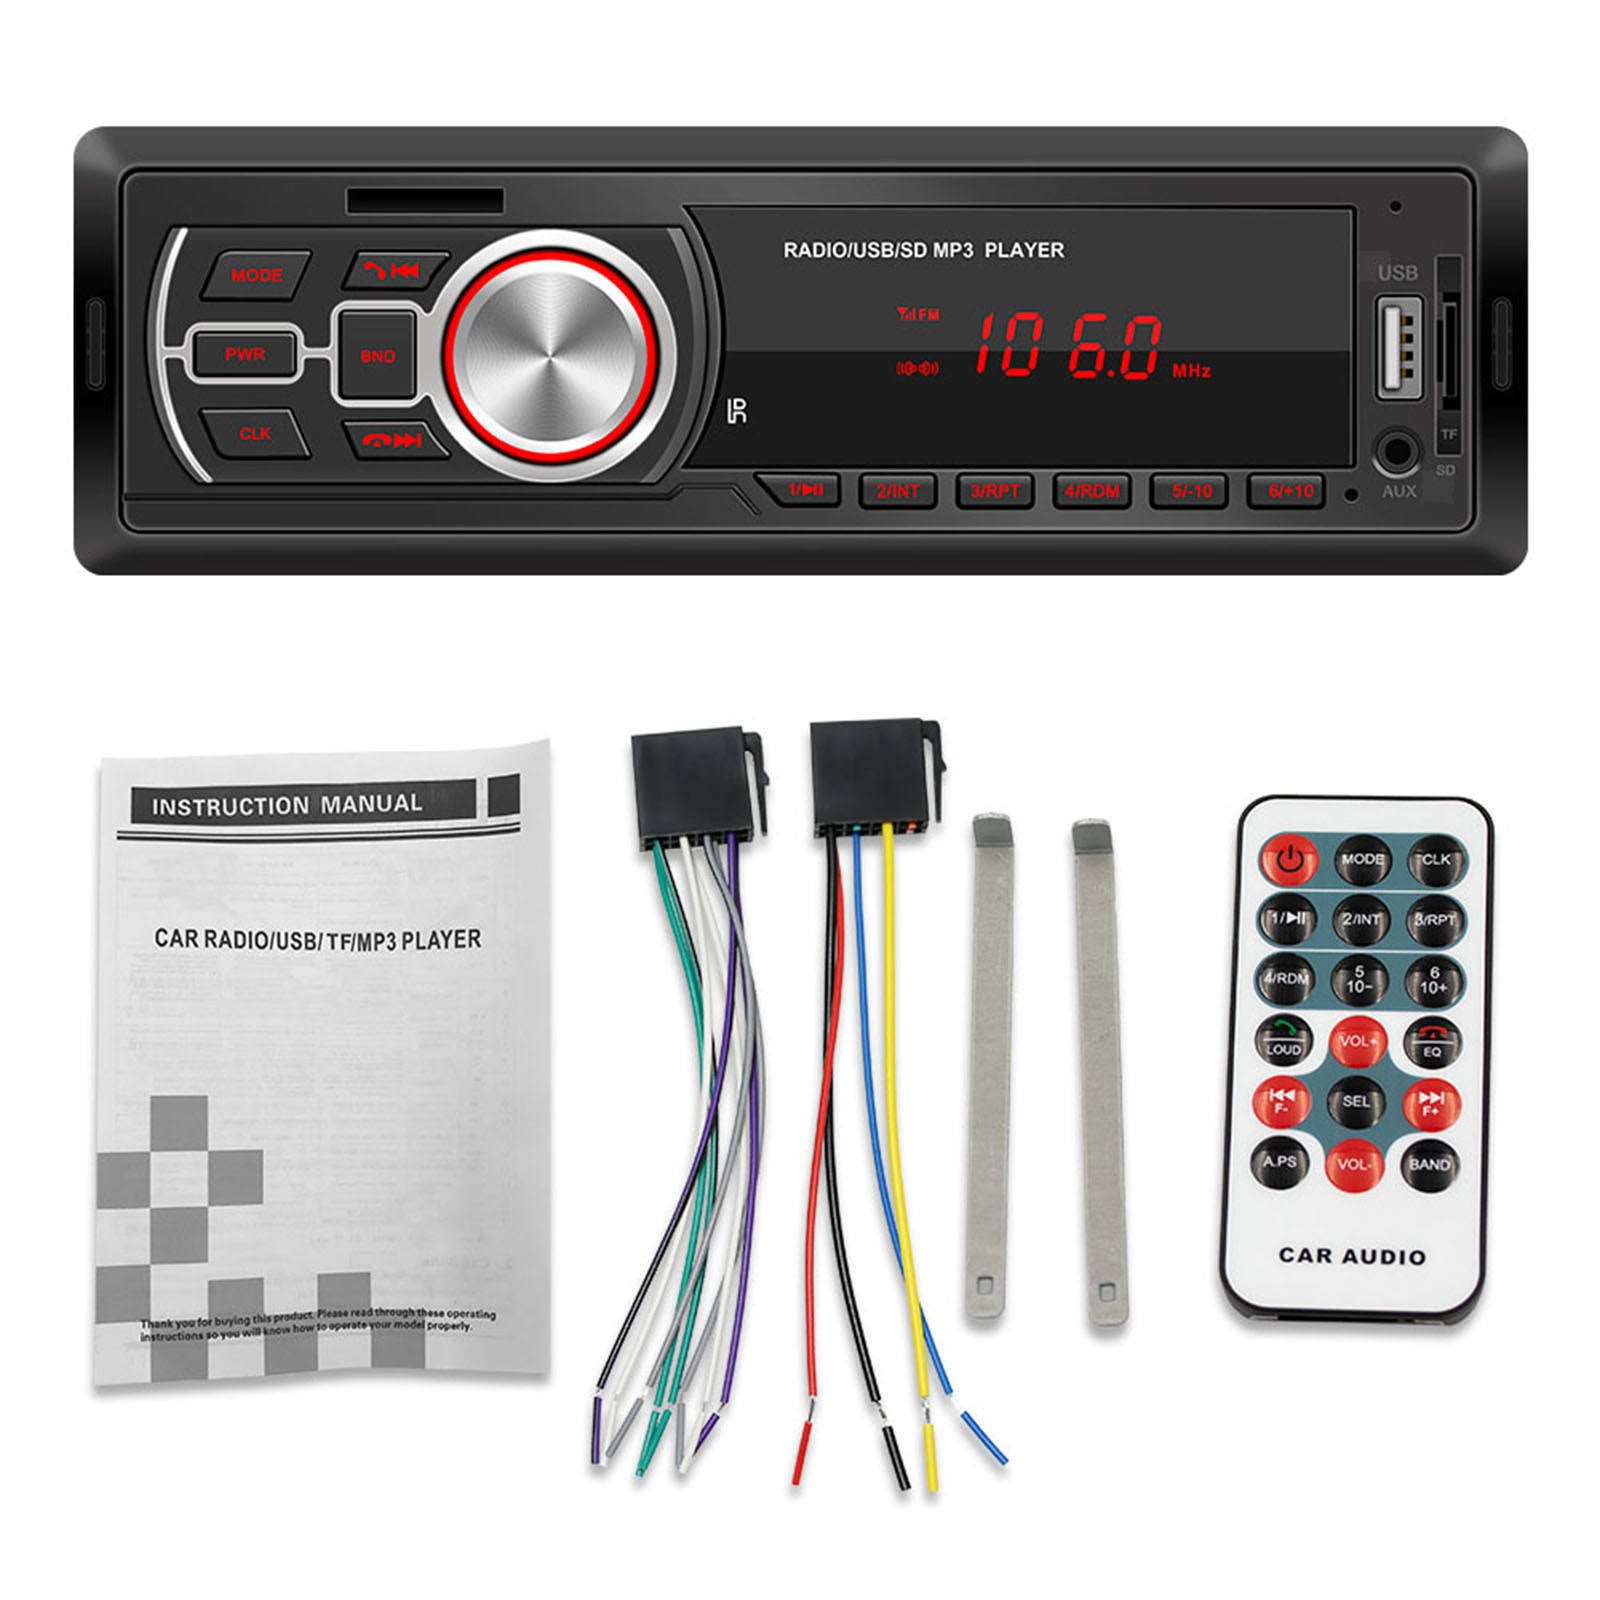 Car Stereo Hands-Free Calling USB Port AUX Input Wireless Remote Control